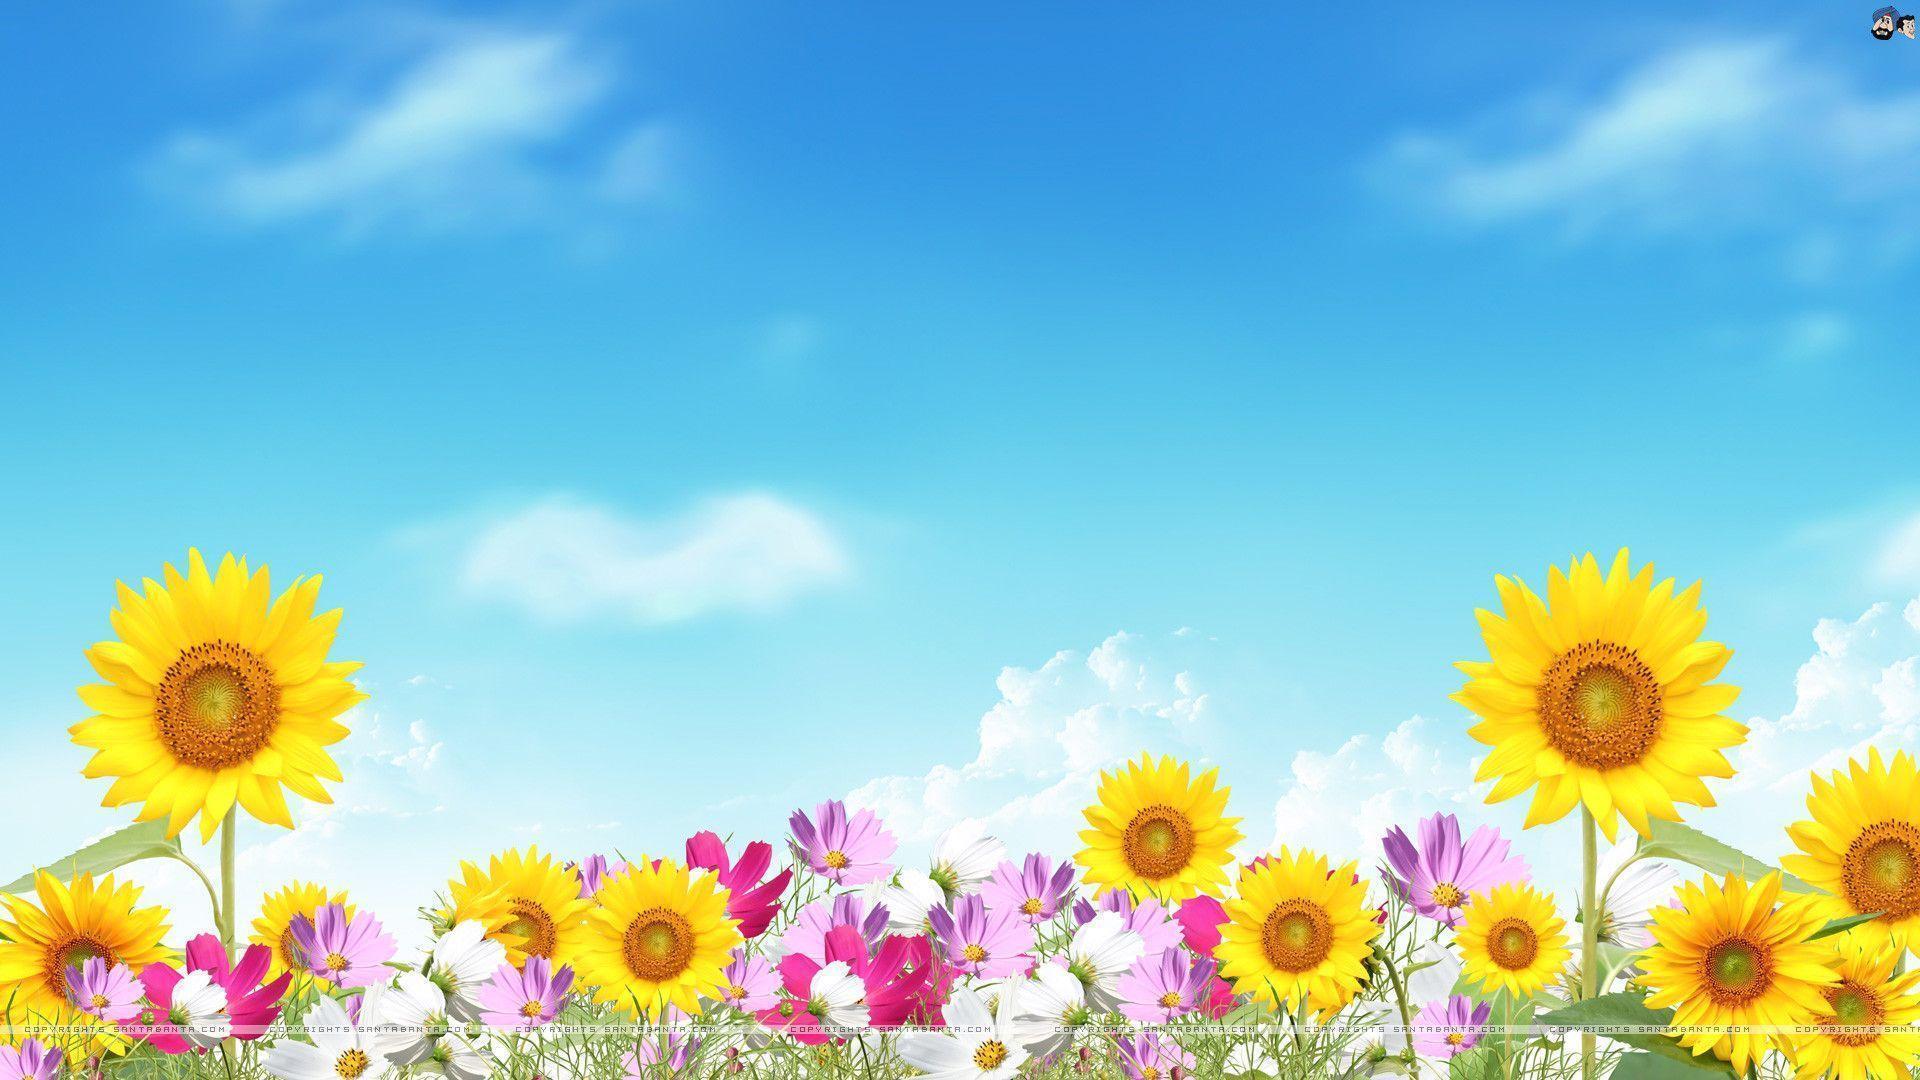 Summer Flower Background HD Image 3 HD Wallpaper. Hdimges